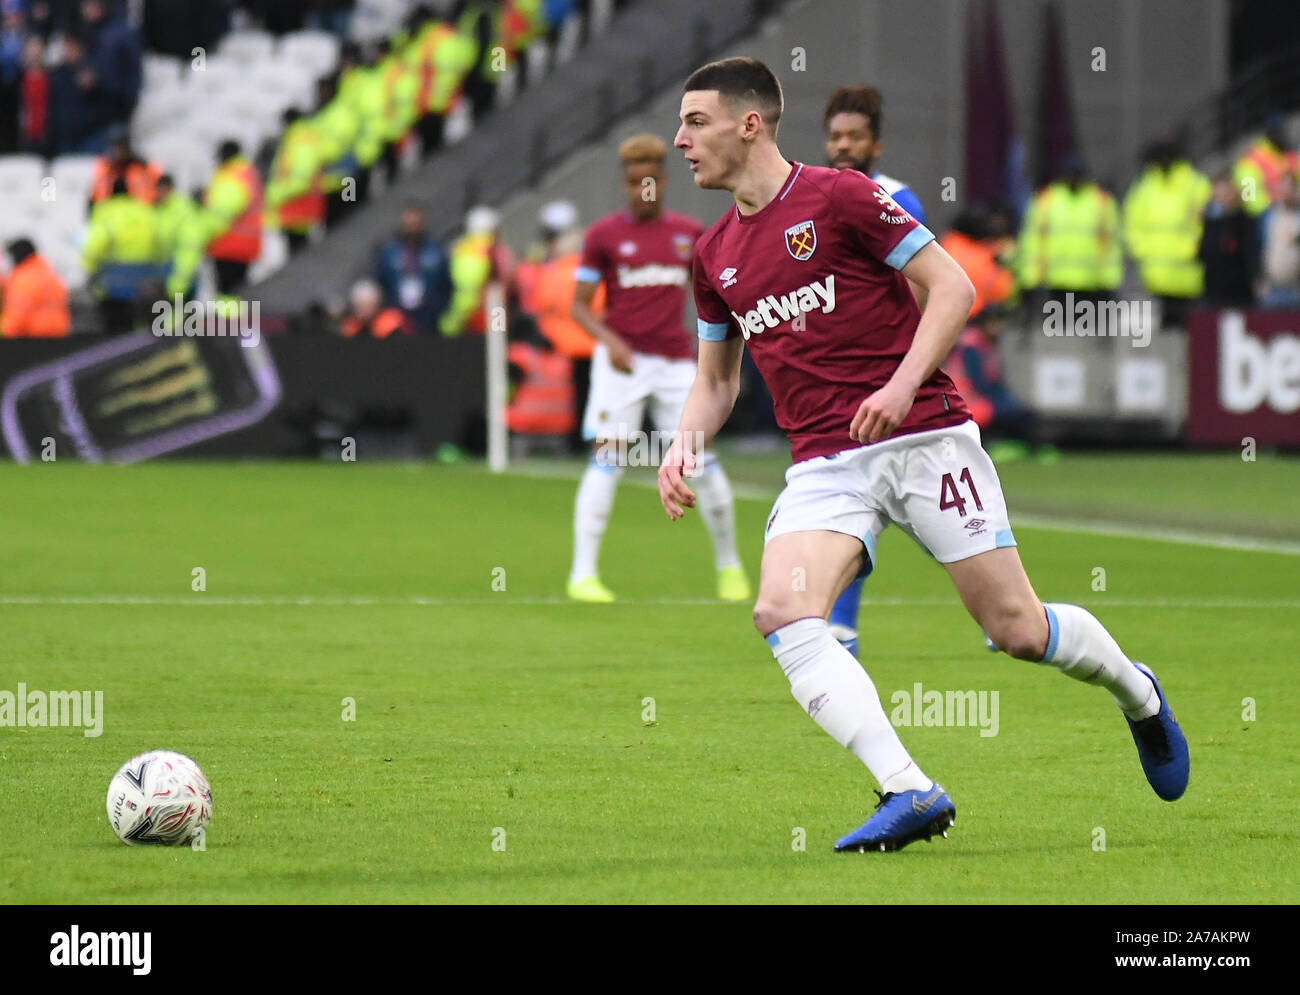 LONDON, ENGLAND - JANUARY 5, 2019: pictured during the 2018/19 FA Cup Round 3 game between West Ham United and Birmingham City FC at London Stadium. Stock Photo